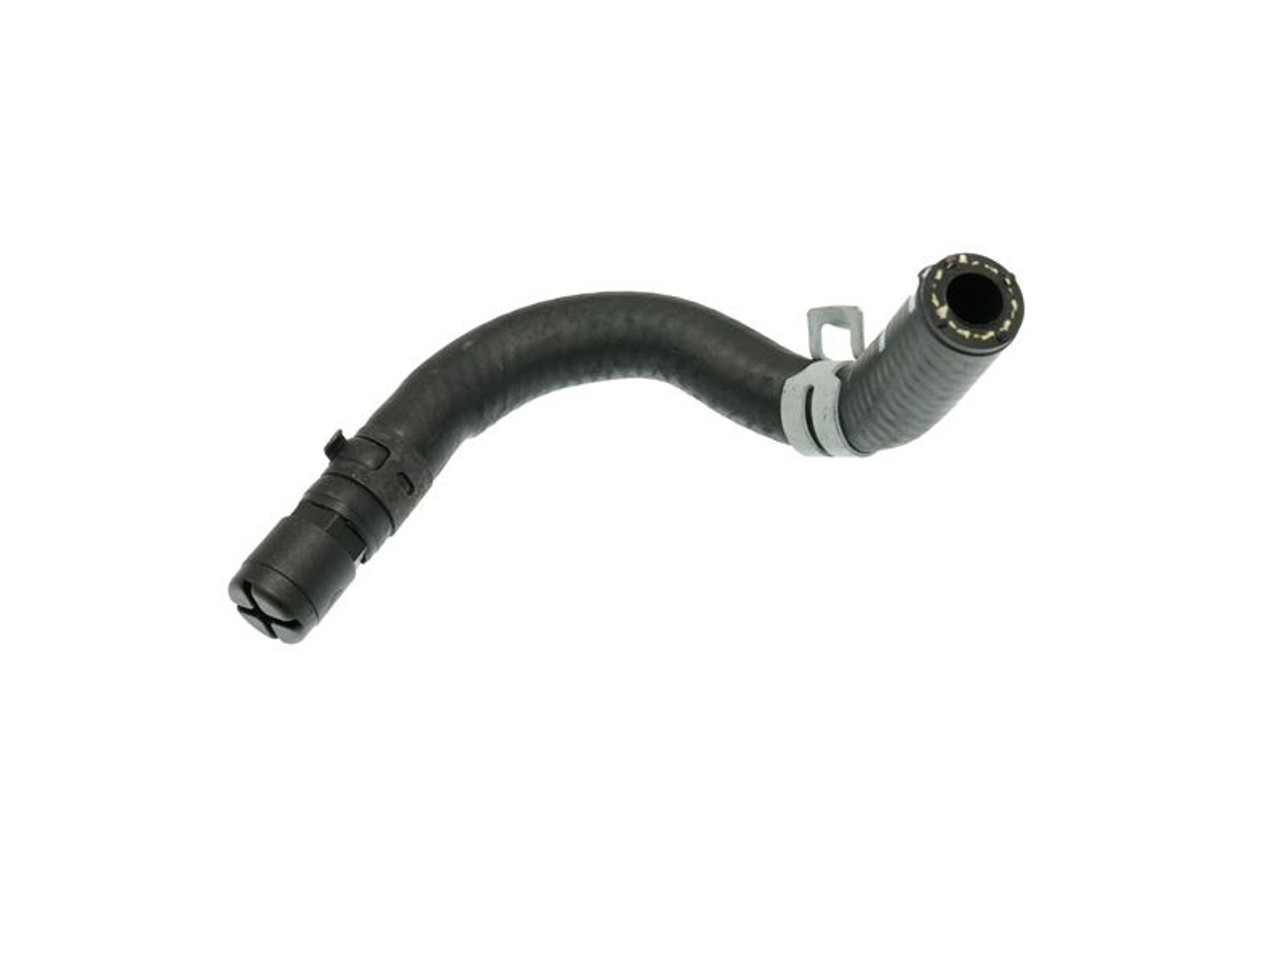 Genuine Discovery 4 and Range Rover Sport 3.0 Coolant Bleed Pipe - LR015811